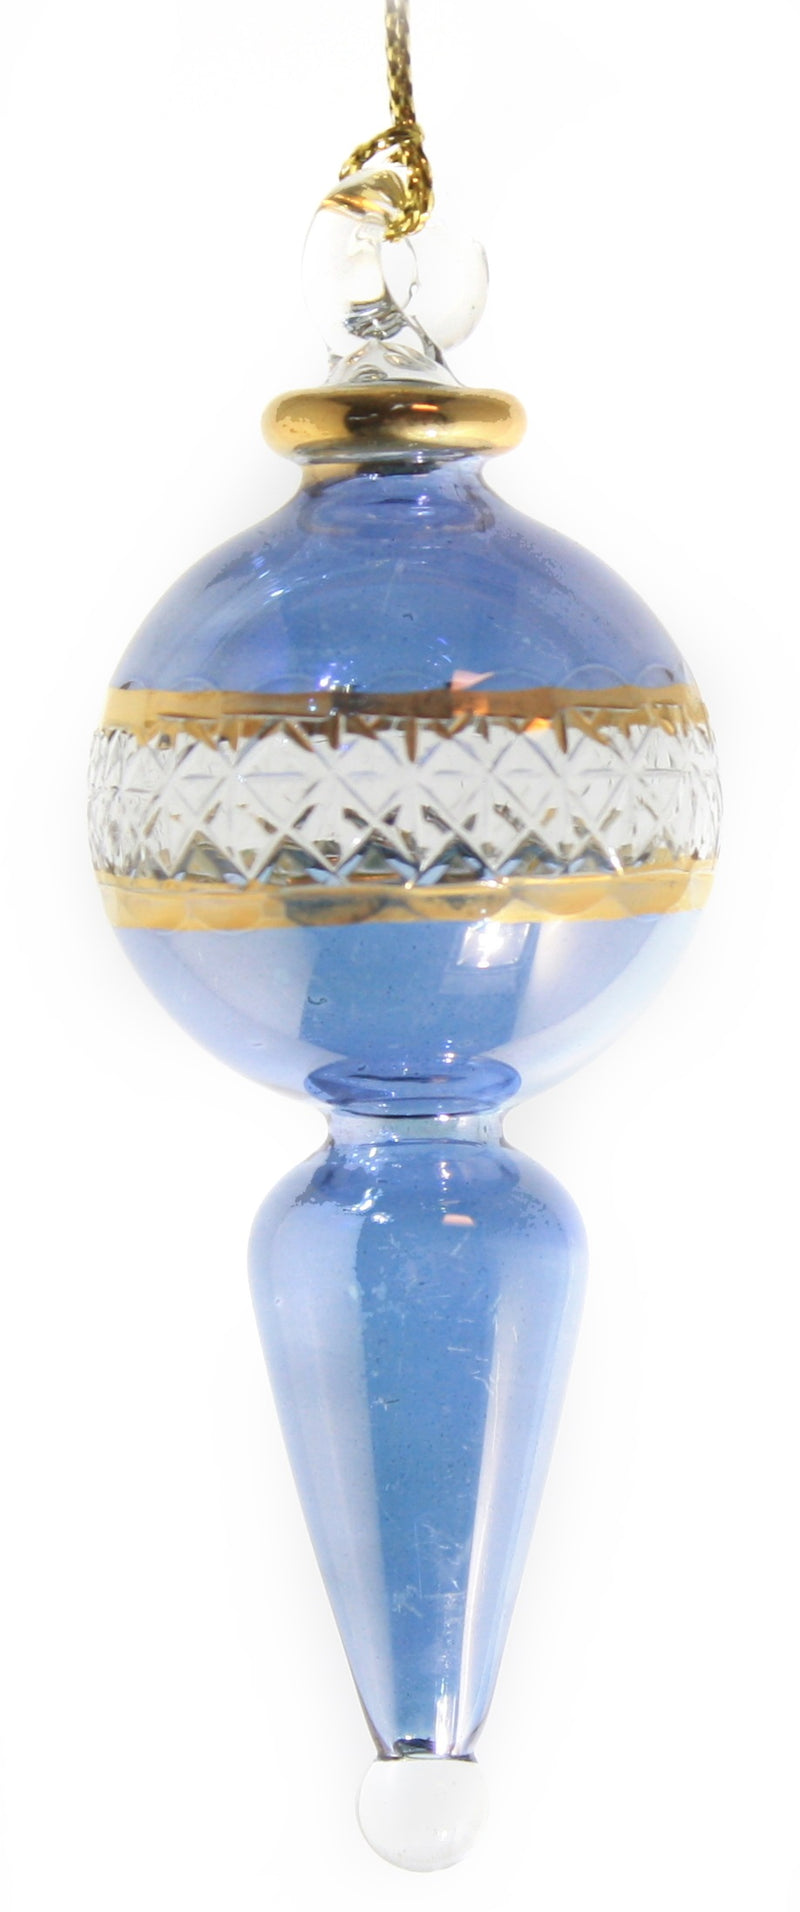 Lattice Glass Ornaments With Gold Accents - Blue Ball with Finial